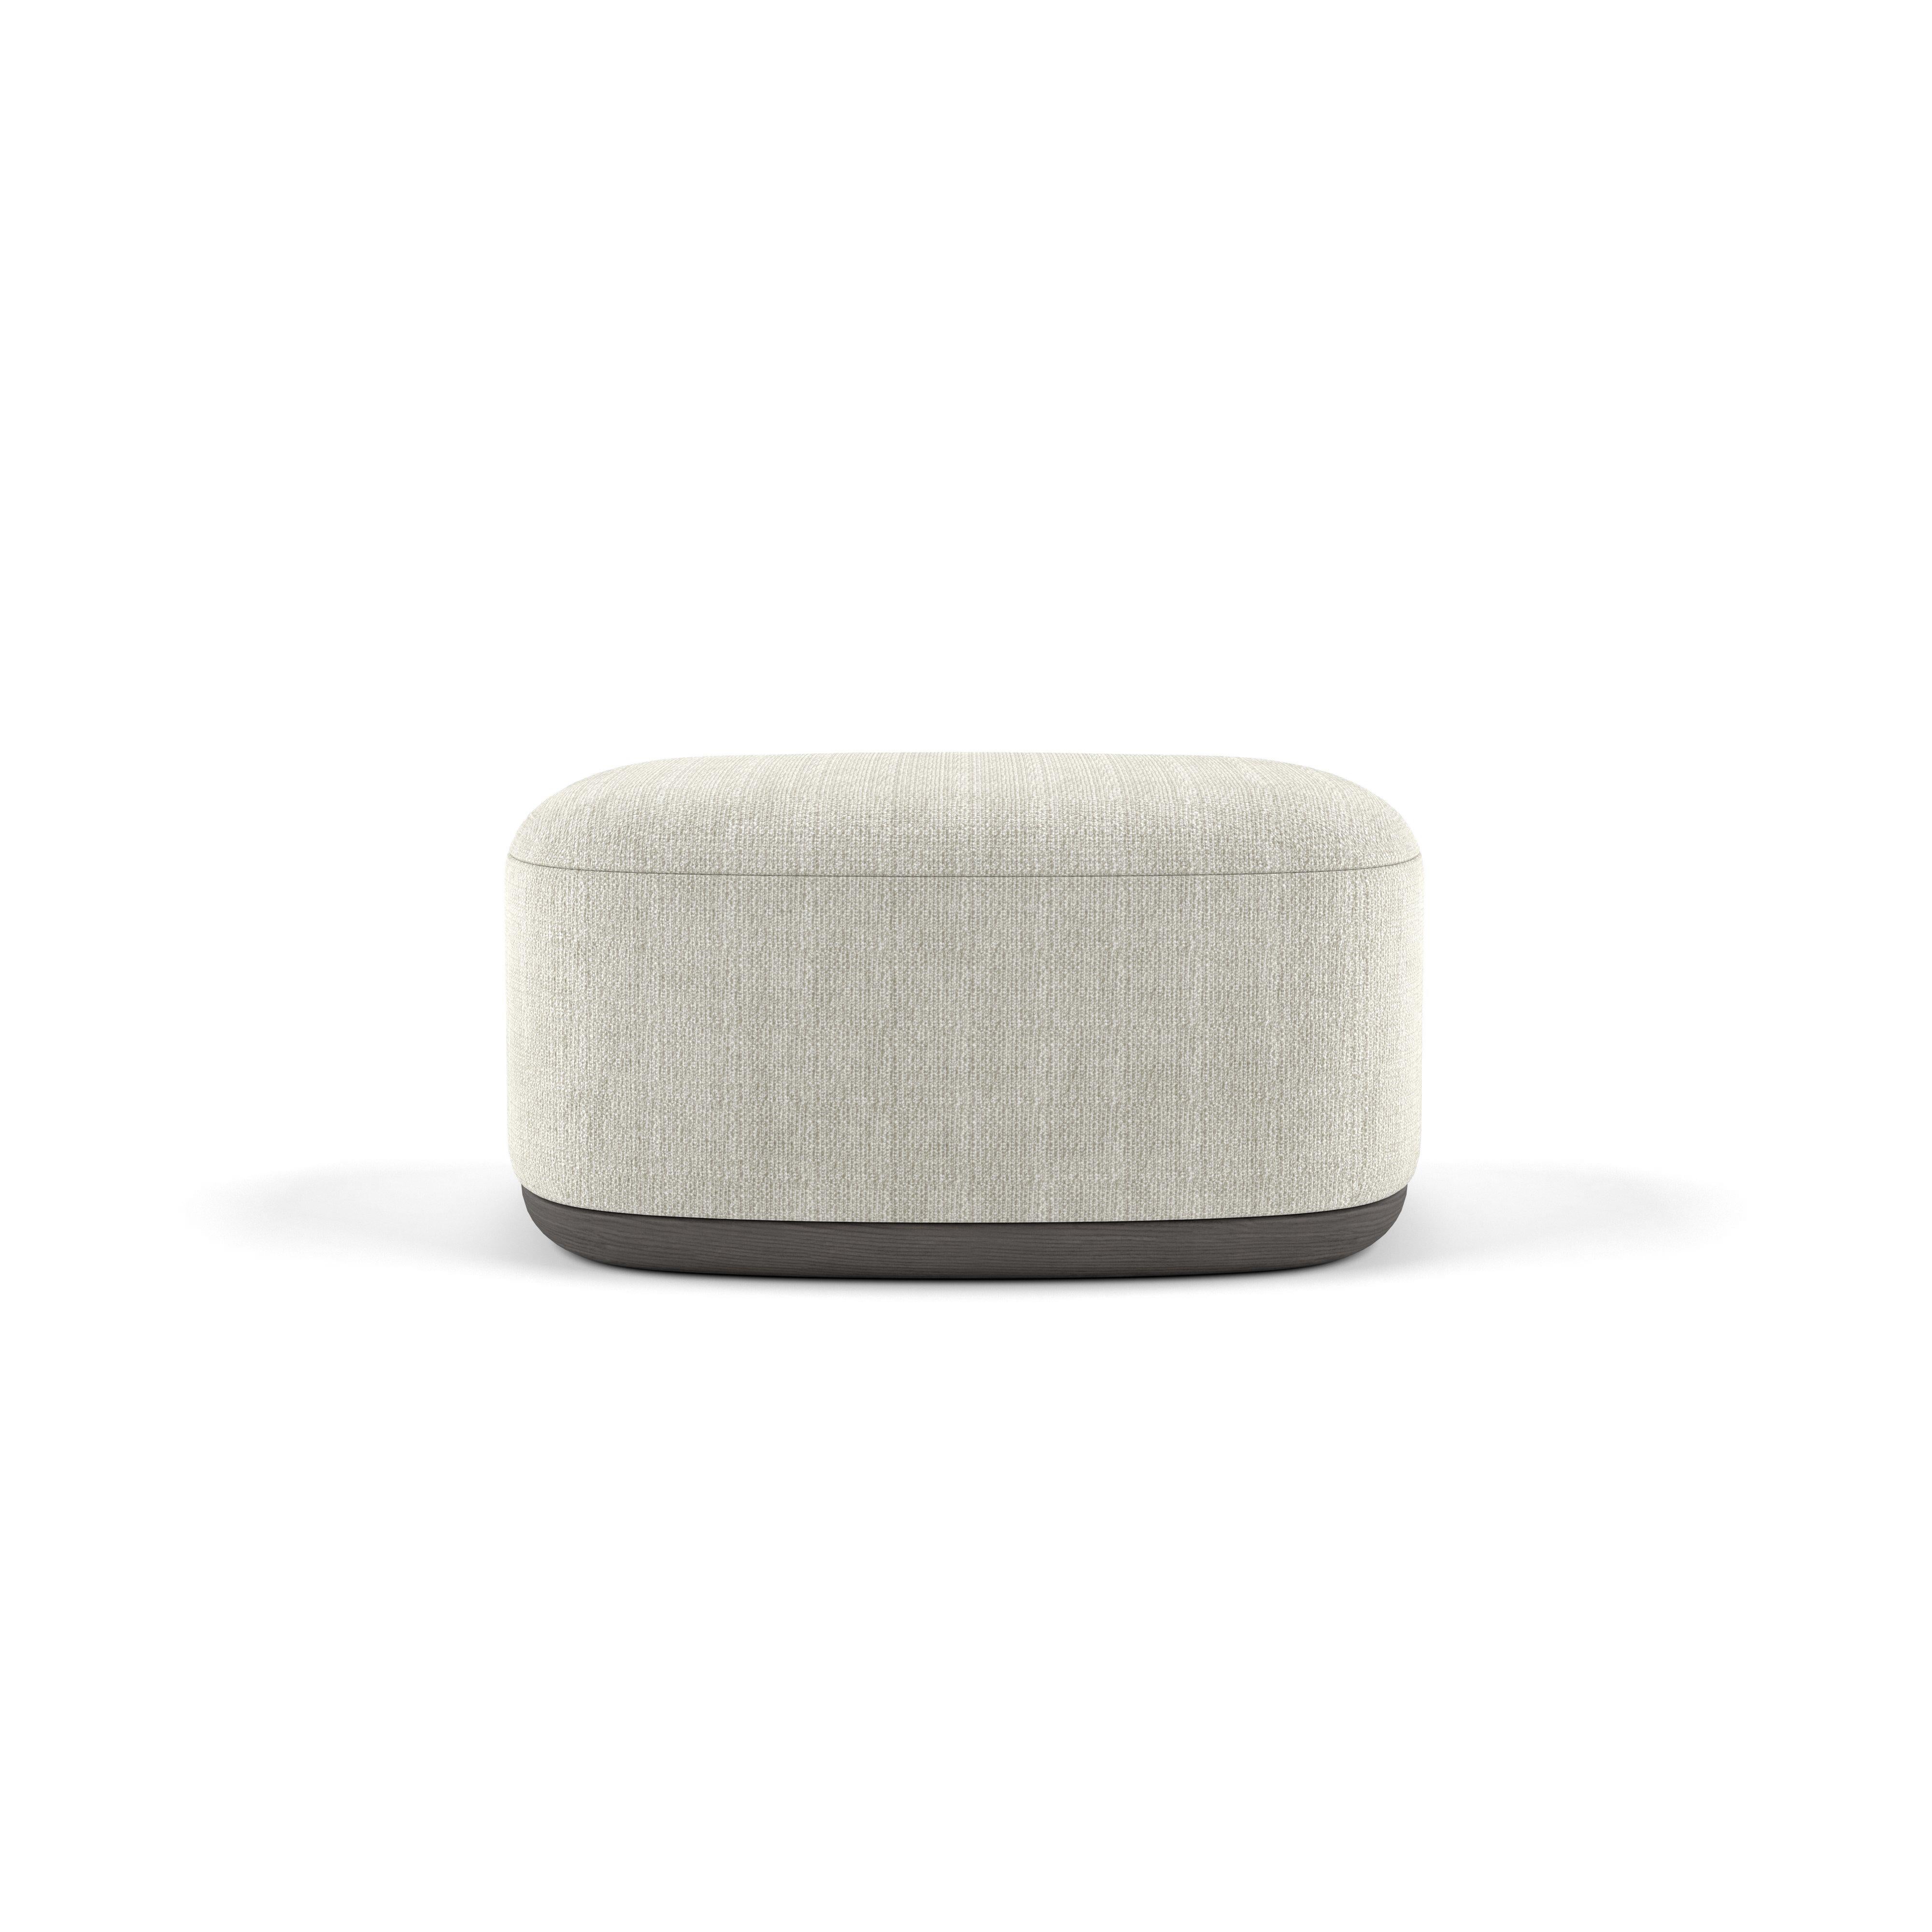 Unio Ottoman by Poiat 
Designers: Timo Mikkonen & Antti Rouhunkoski 

Collection UNIO 2023

Dimensions: H. 40 x W. 75 D. 72 cm SH. 40 
Model shown: Fabric Fox 02 by Larsen

The Unio Collection, featuring an armchair, ottomans, sofas, marks a new